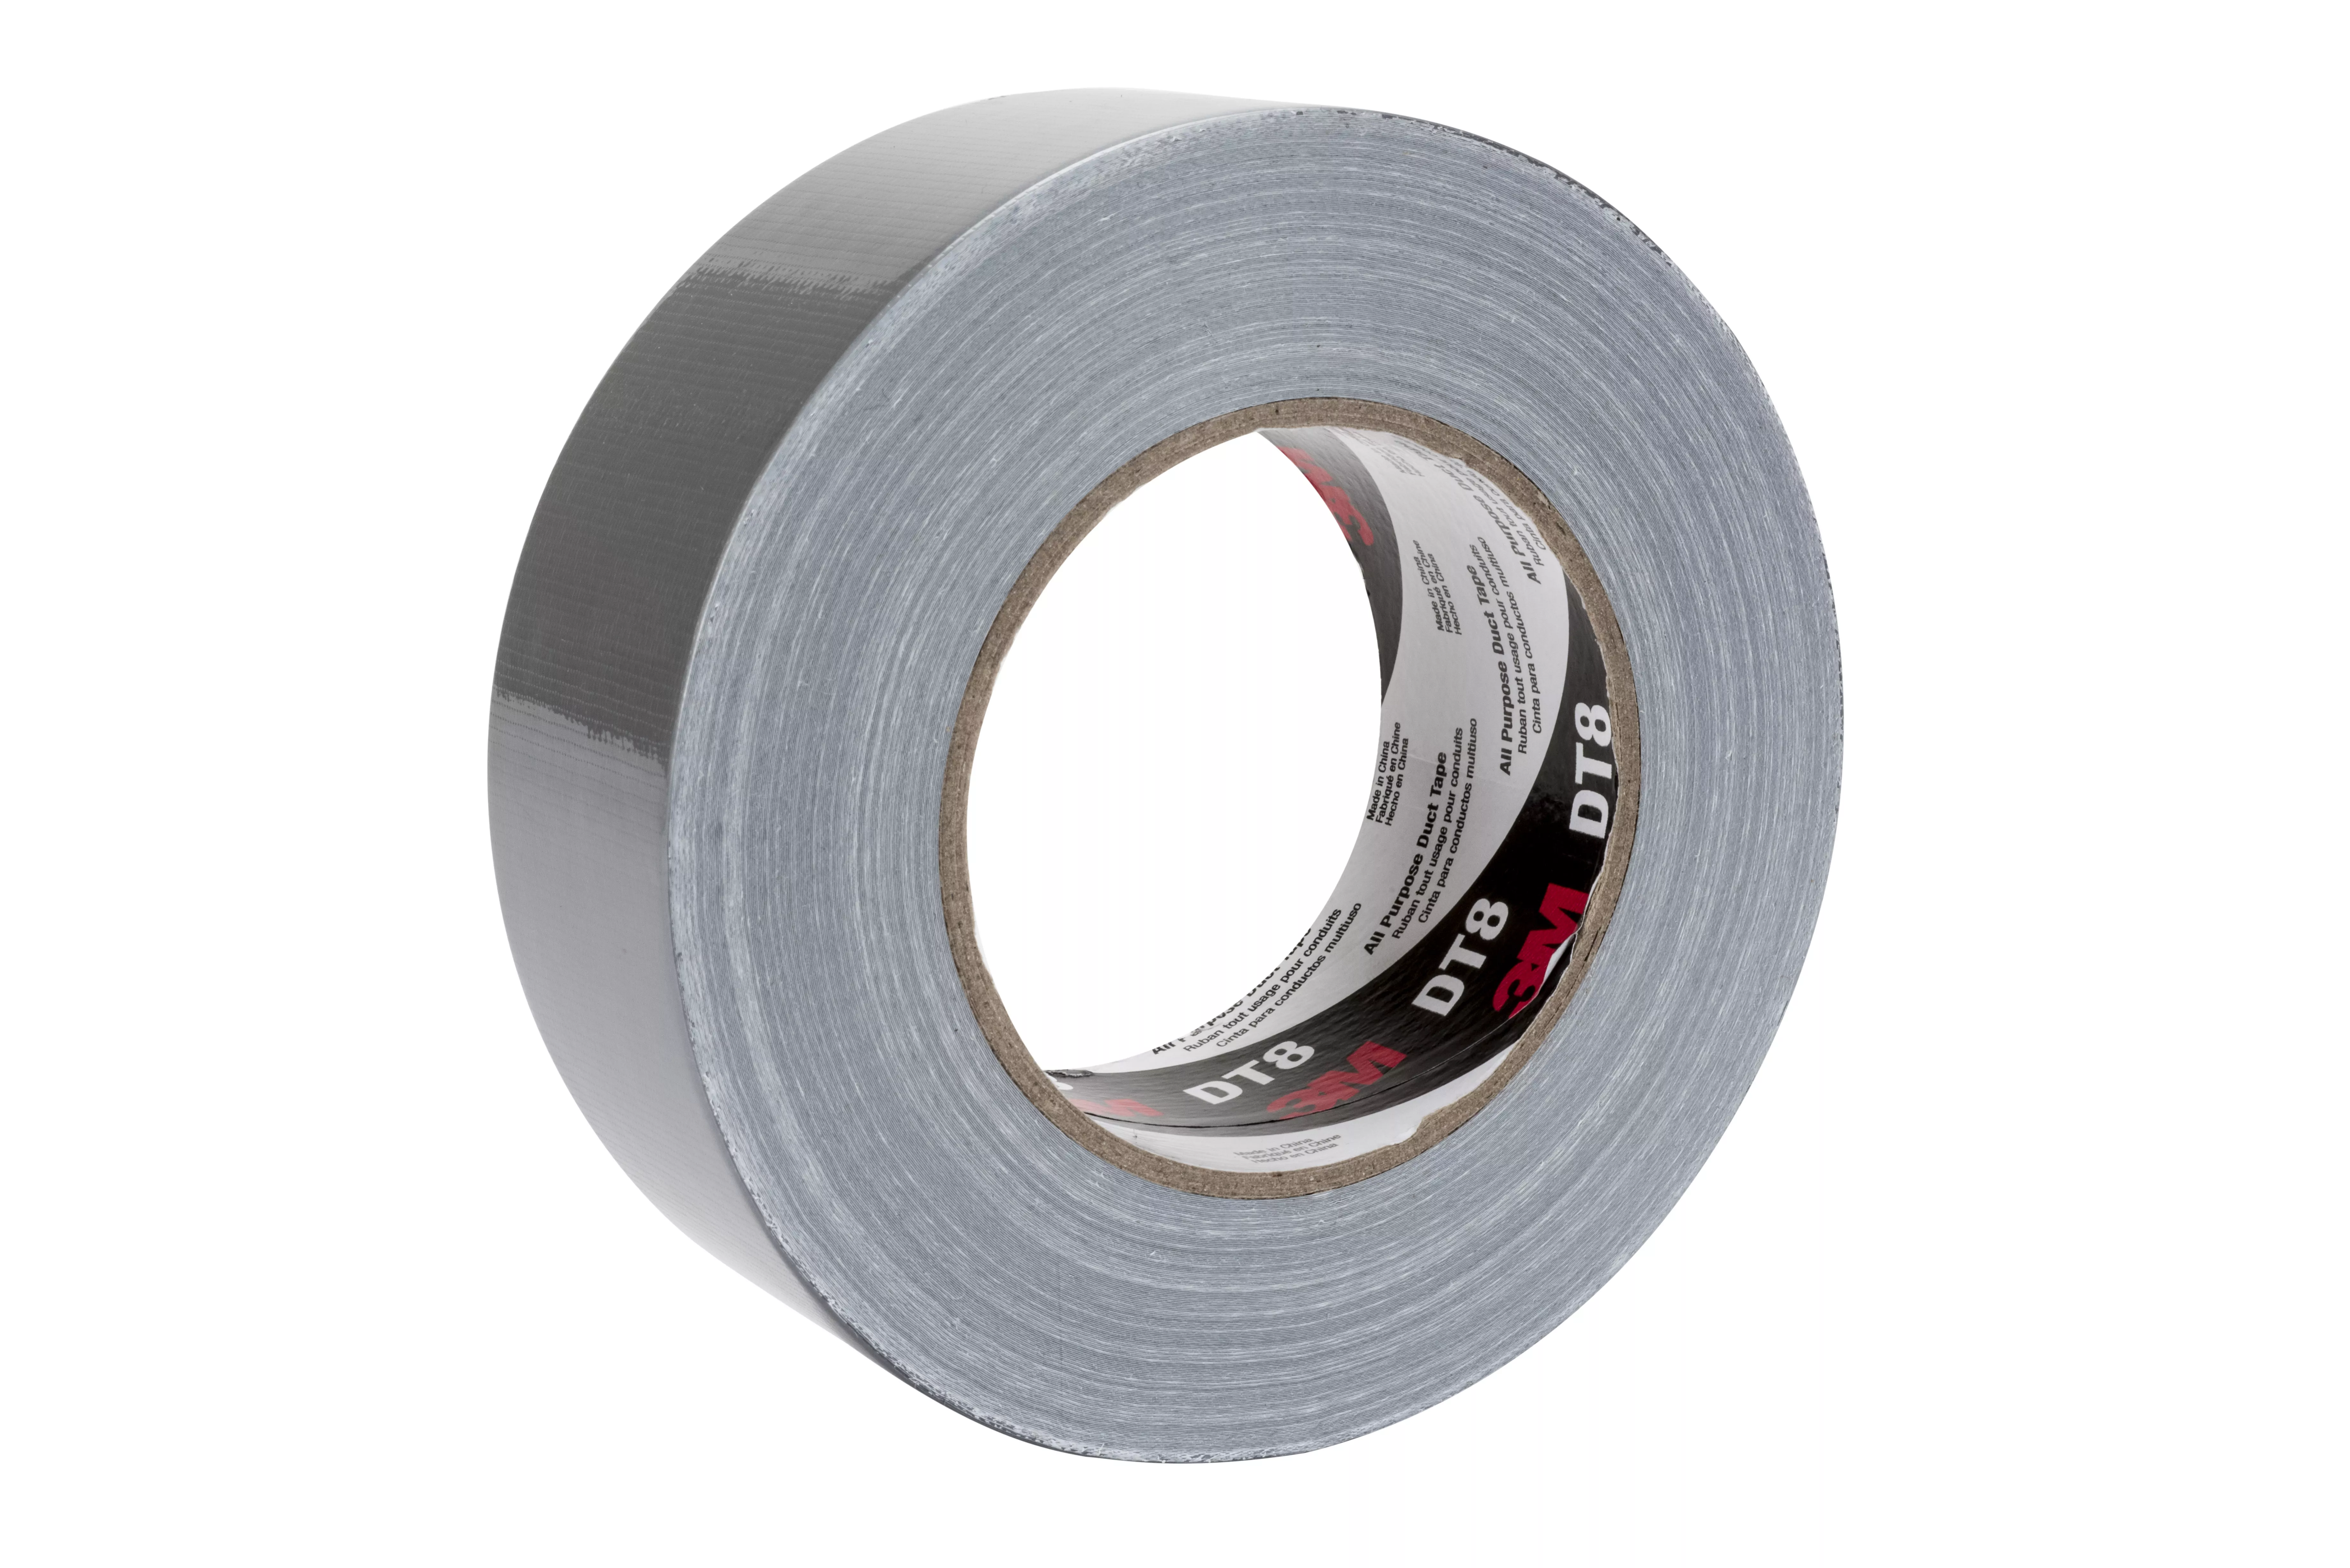 3M™ All Purpose Duct Tape DT8, Silver, 48 mm x 54.8 m, 8 mil, 24
Roll/Case, Individually Wrapped Conveniently Packaged